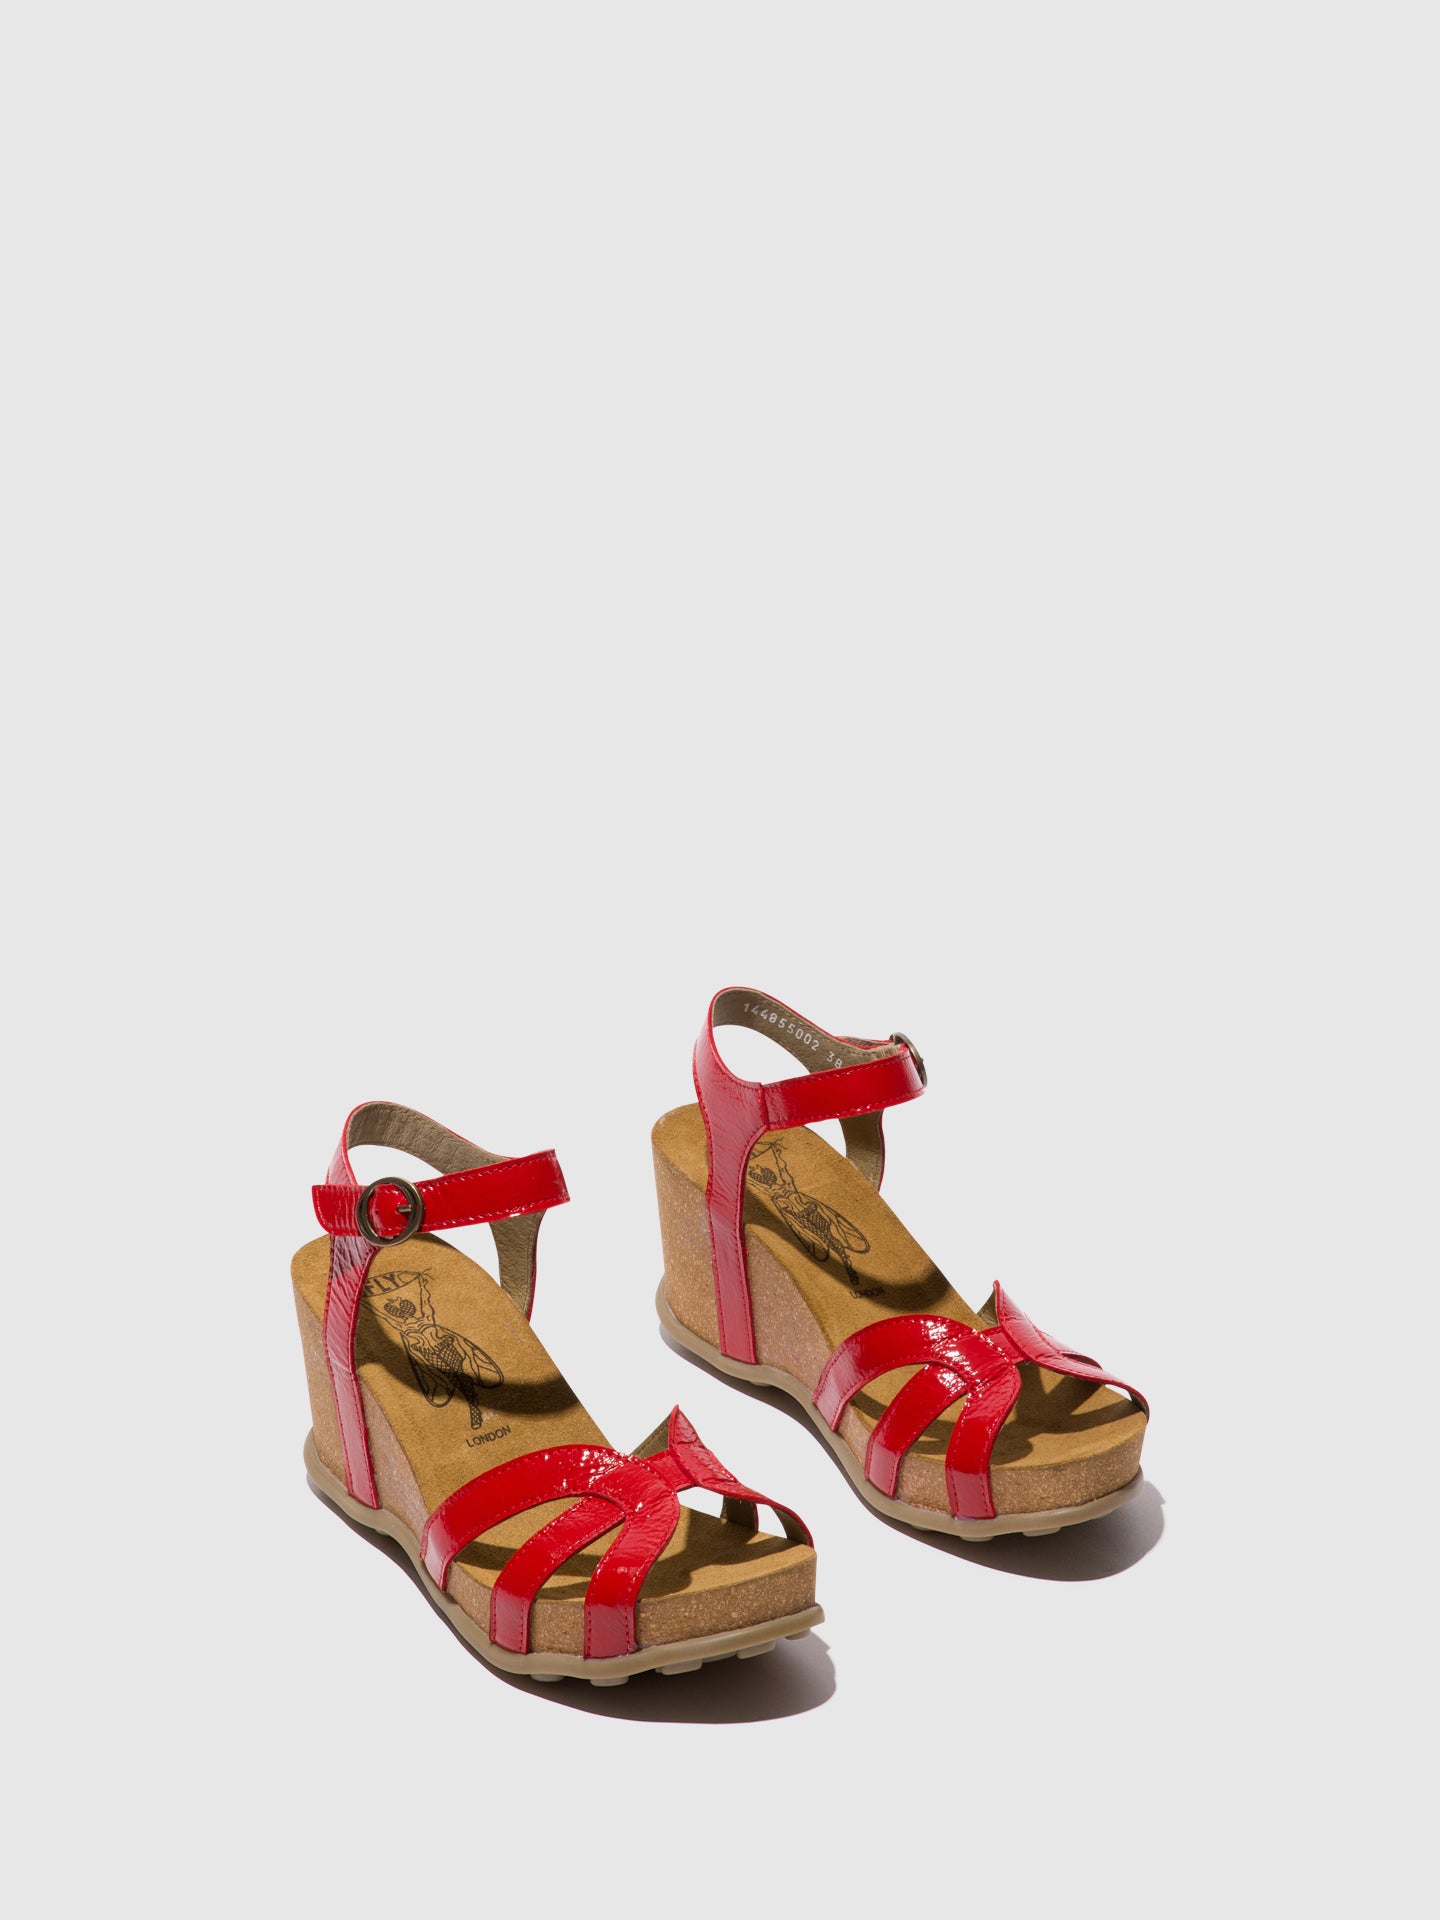 Fly London Ankle Strap Sandals GETA855FLY RED